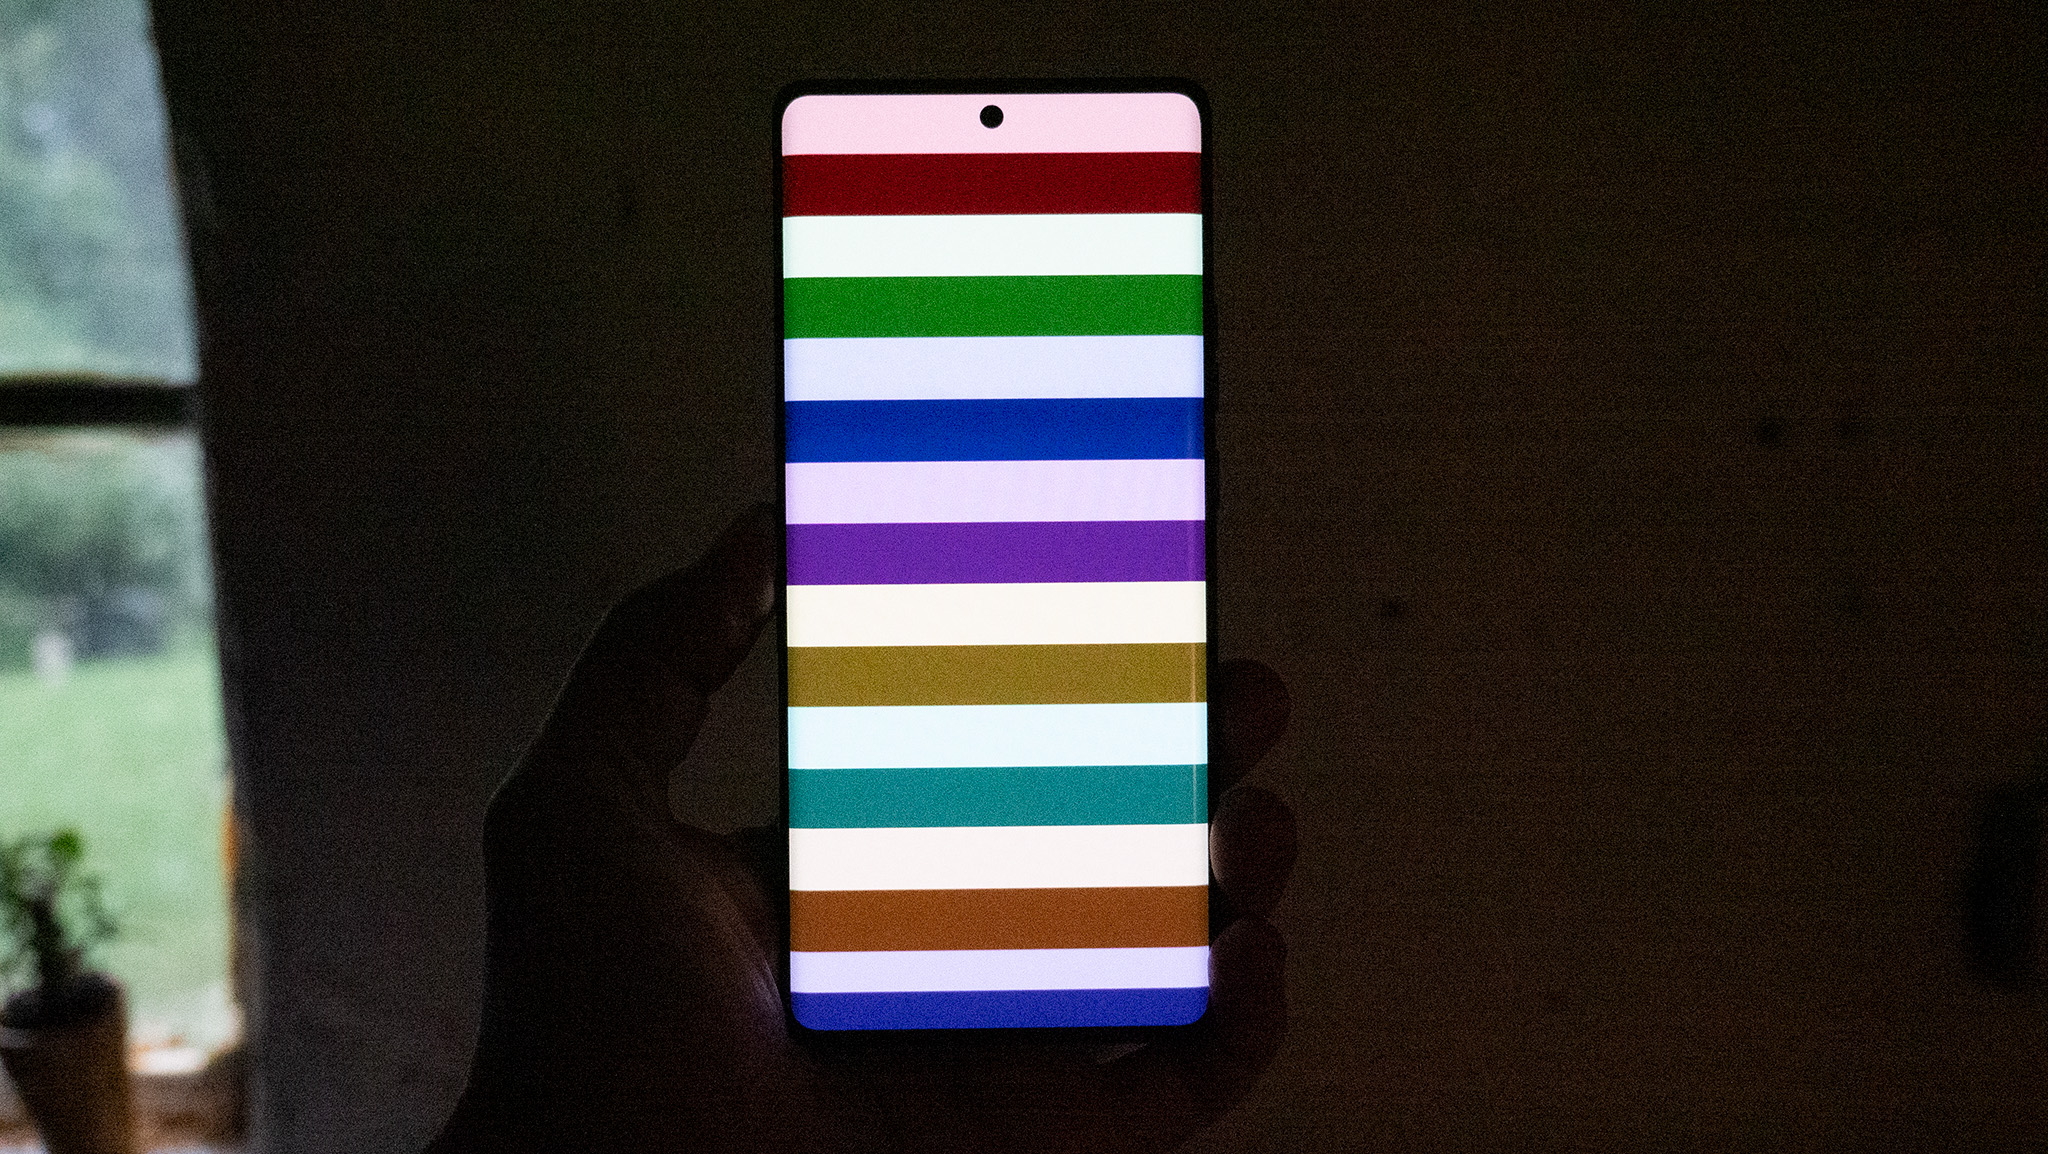 Measuring the flicker rate of each color on the display of the Motorola Edge+ (2023) while using DC dimming/anti-flicker mode